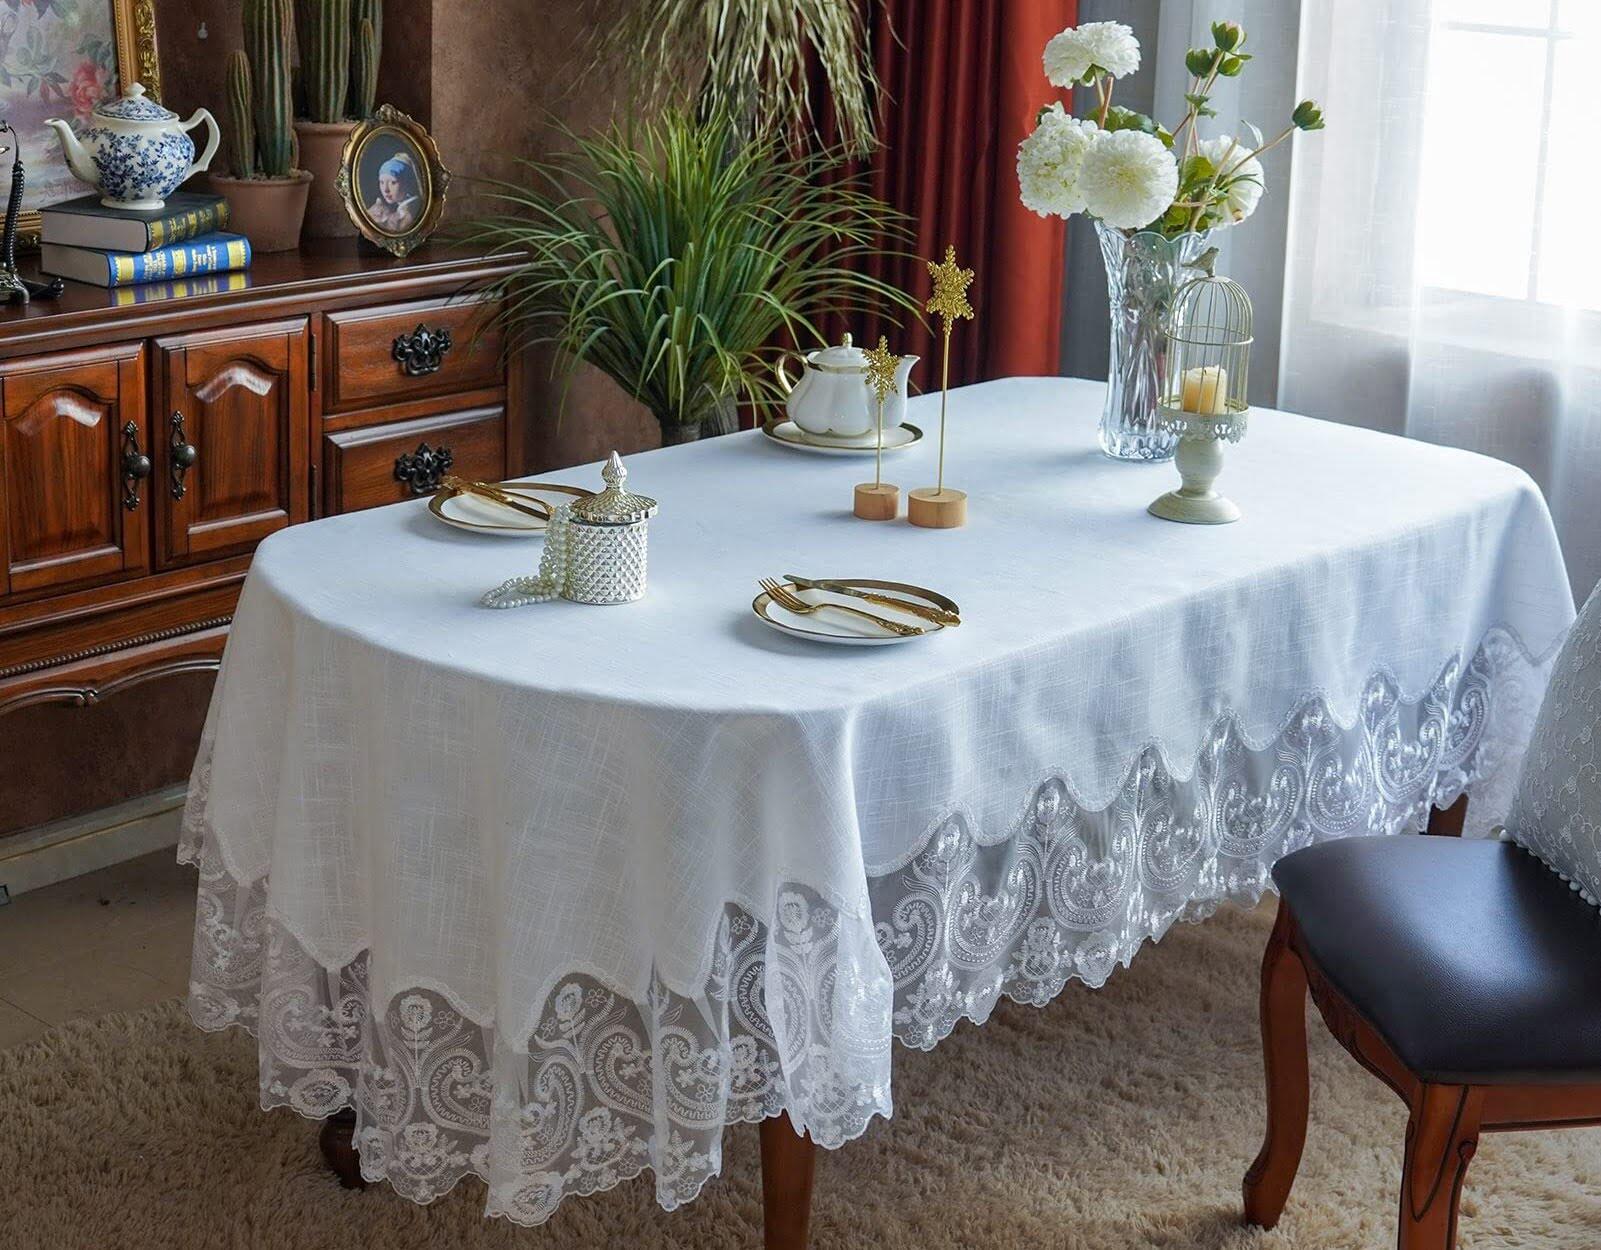 What Is A Name For An Old Style Table Cloth?